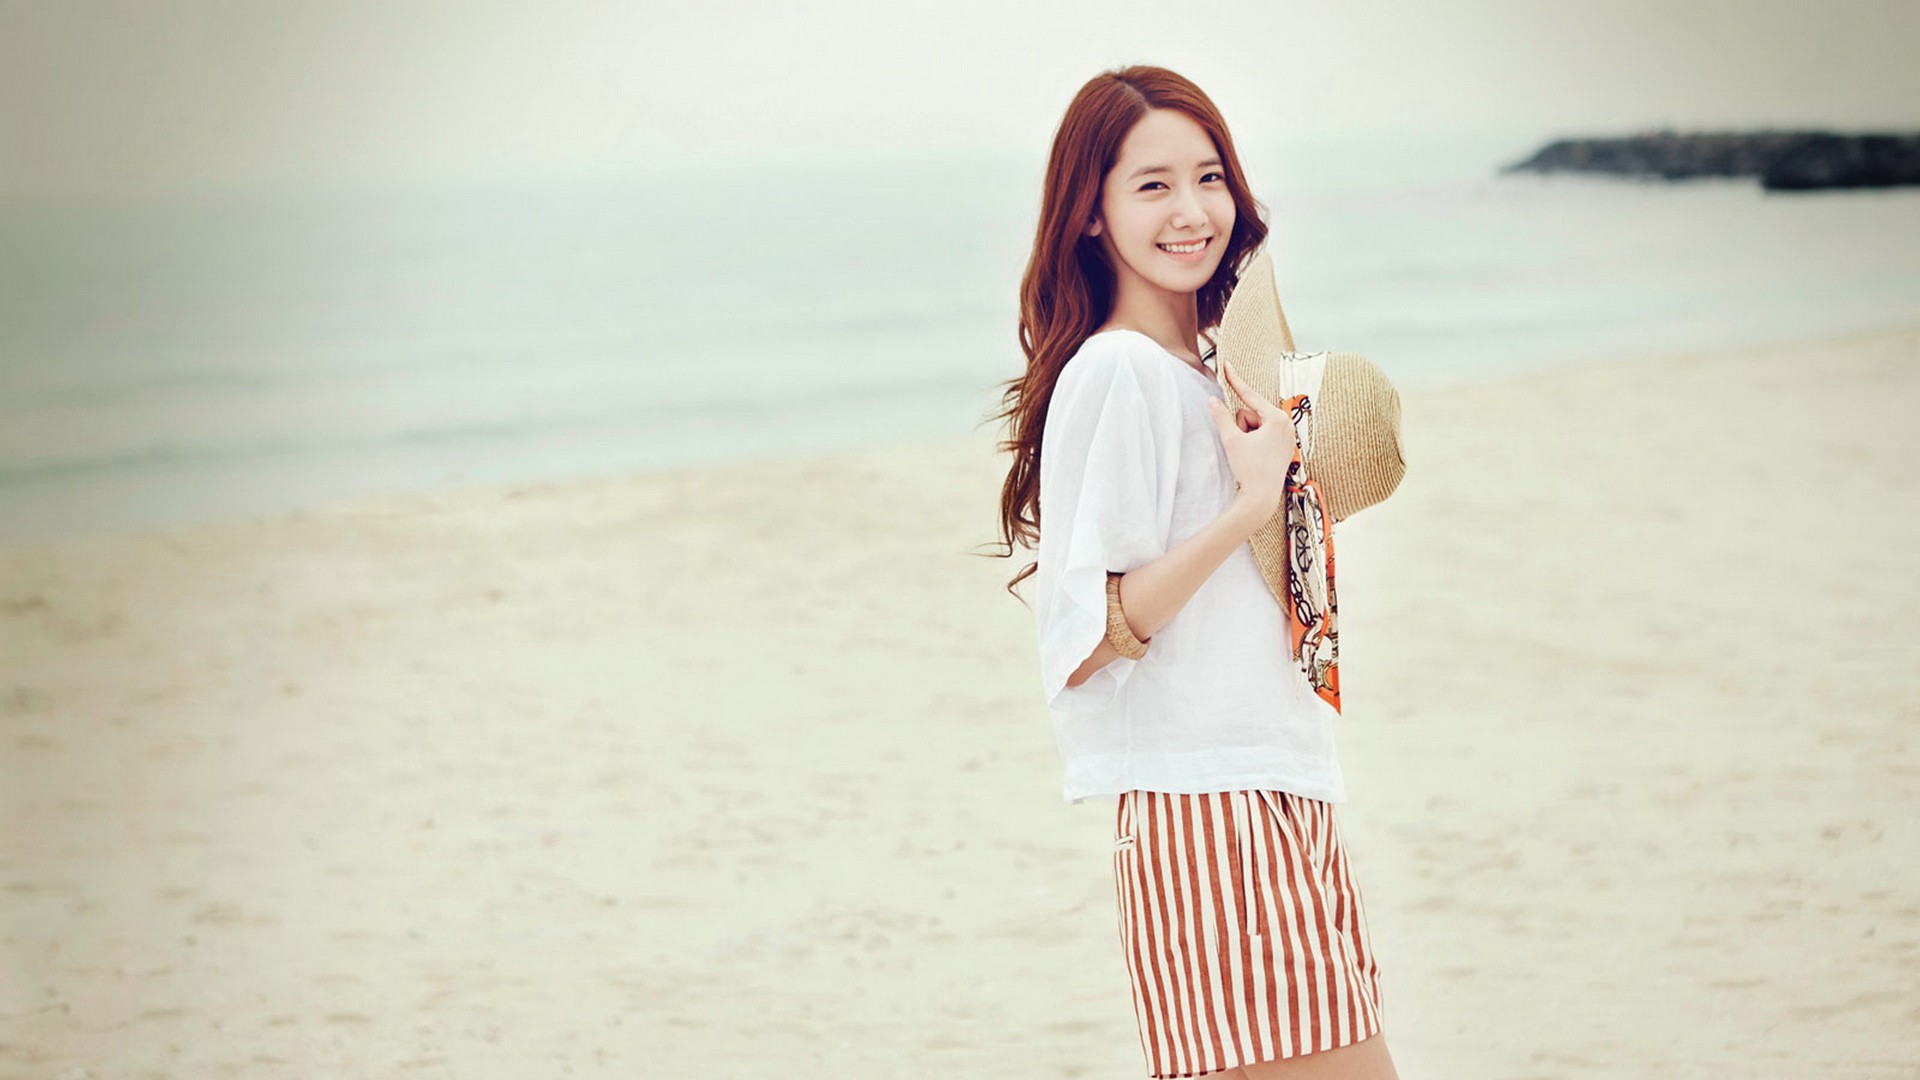 People 1920x1080 Yoona women hat Asian model beach outdoors women outdoors women on beach smiling standing redhead looking at viewer dyed hair